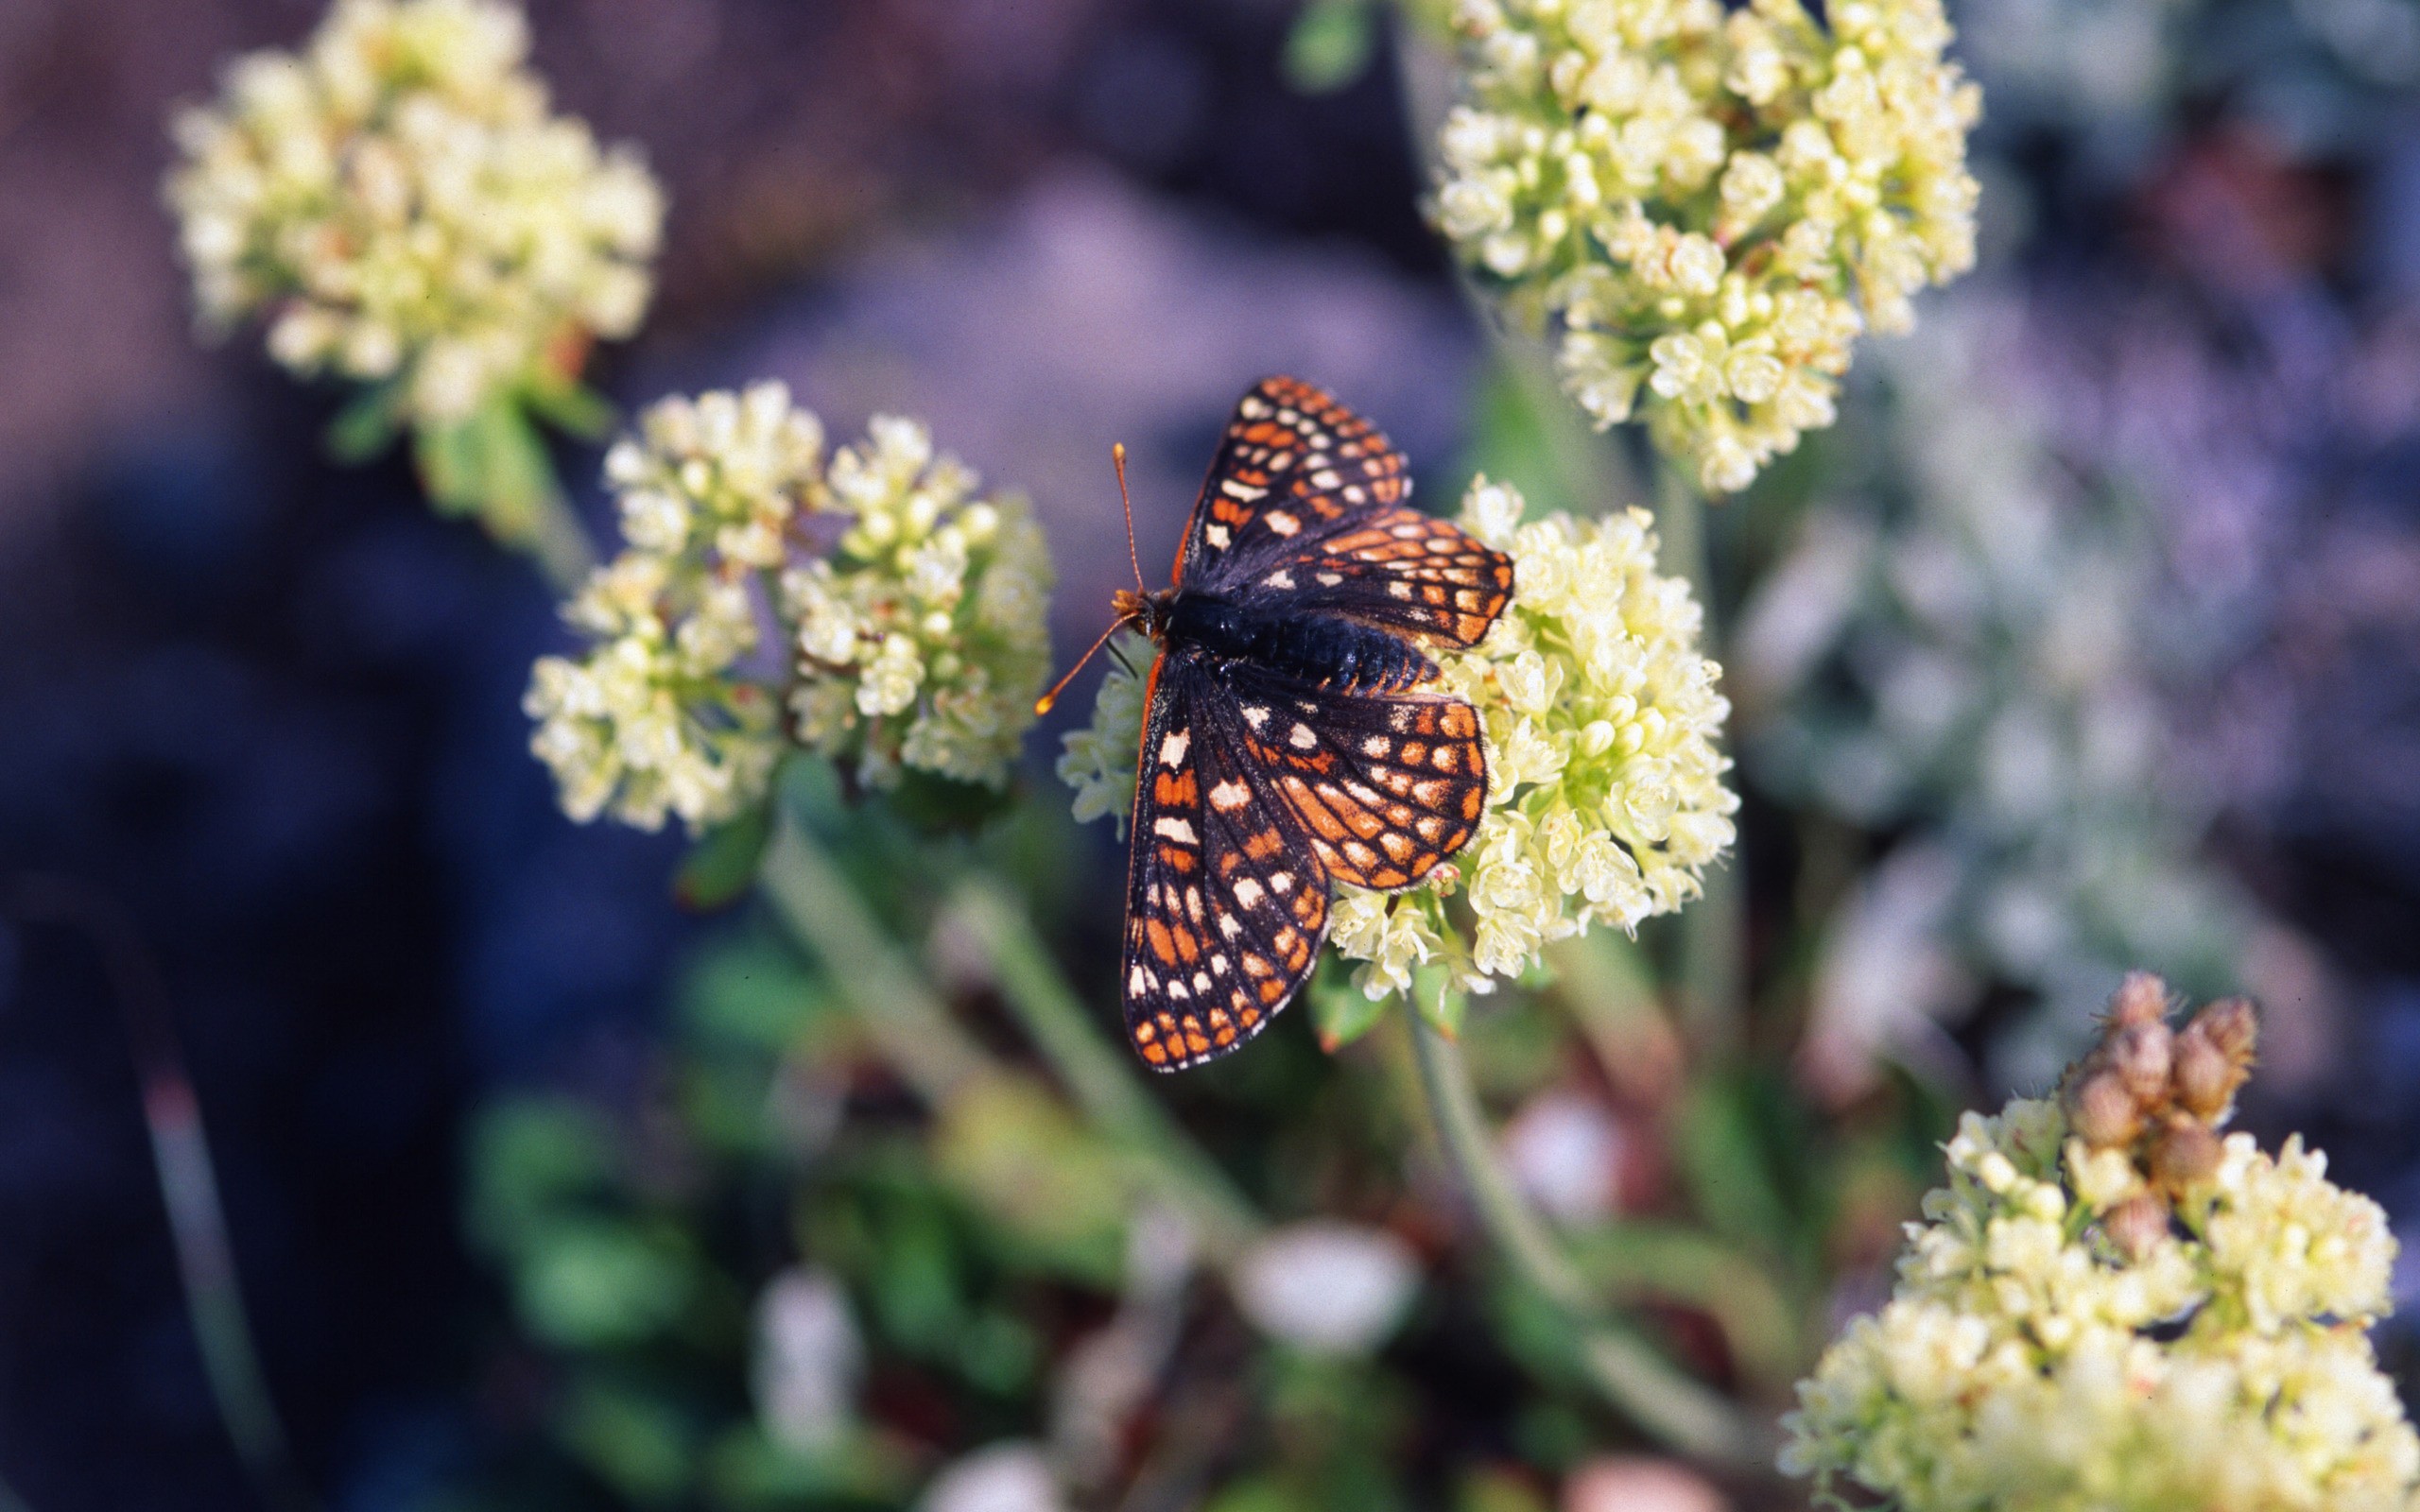 General 2560x1600 flowers nature butterfly insect closeup